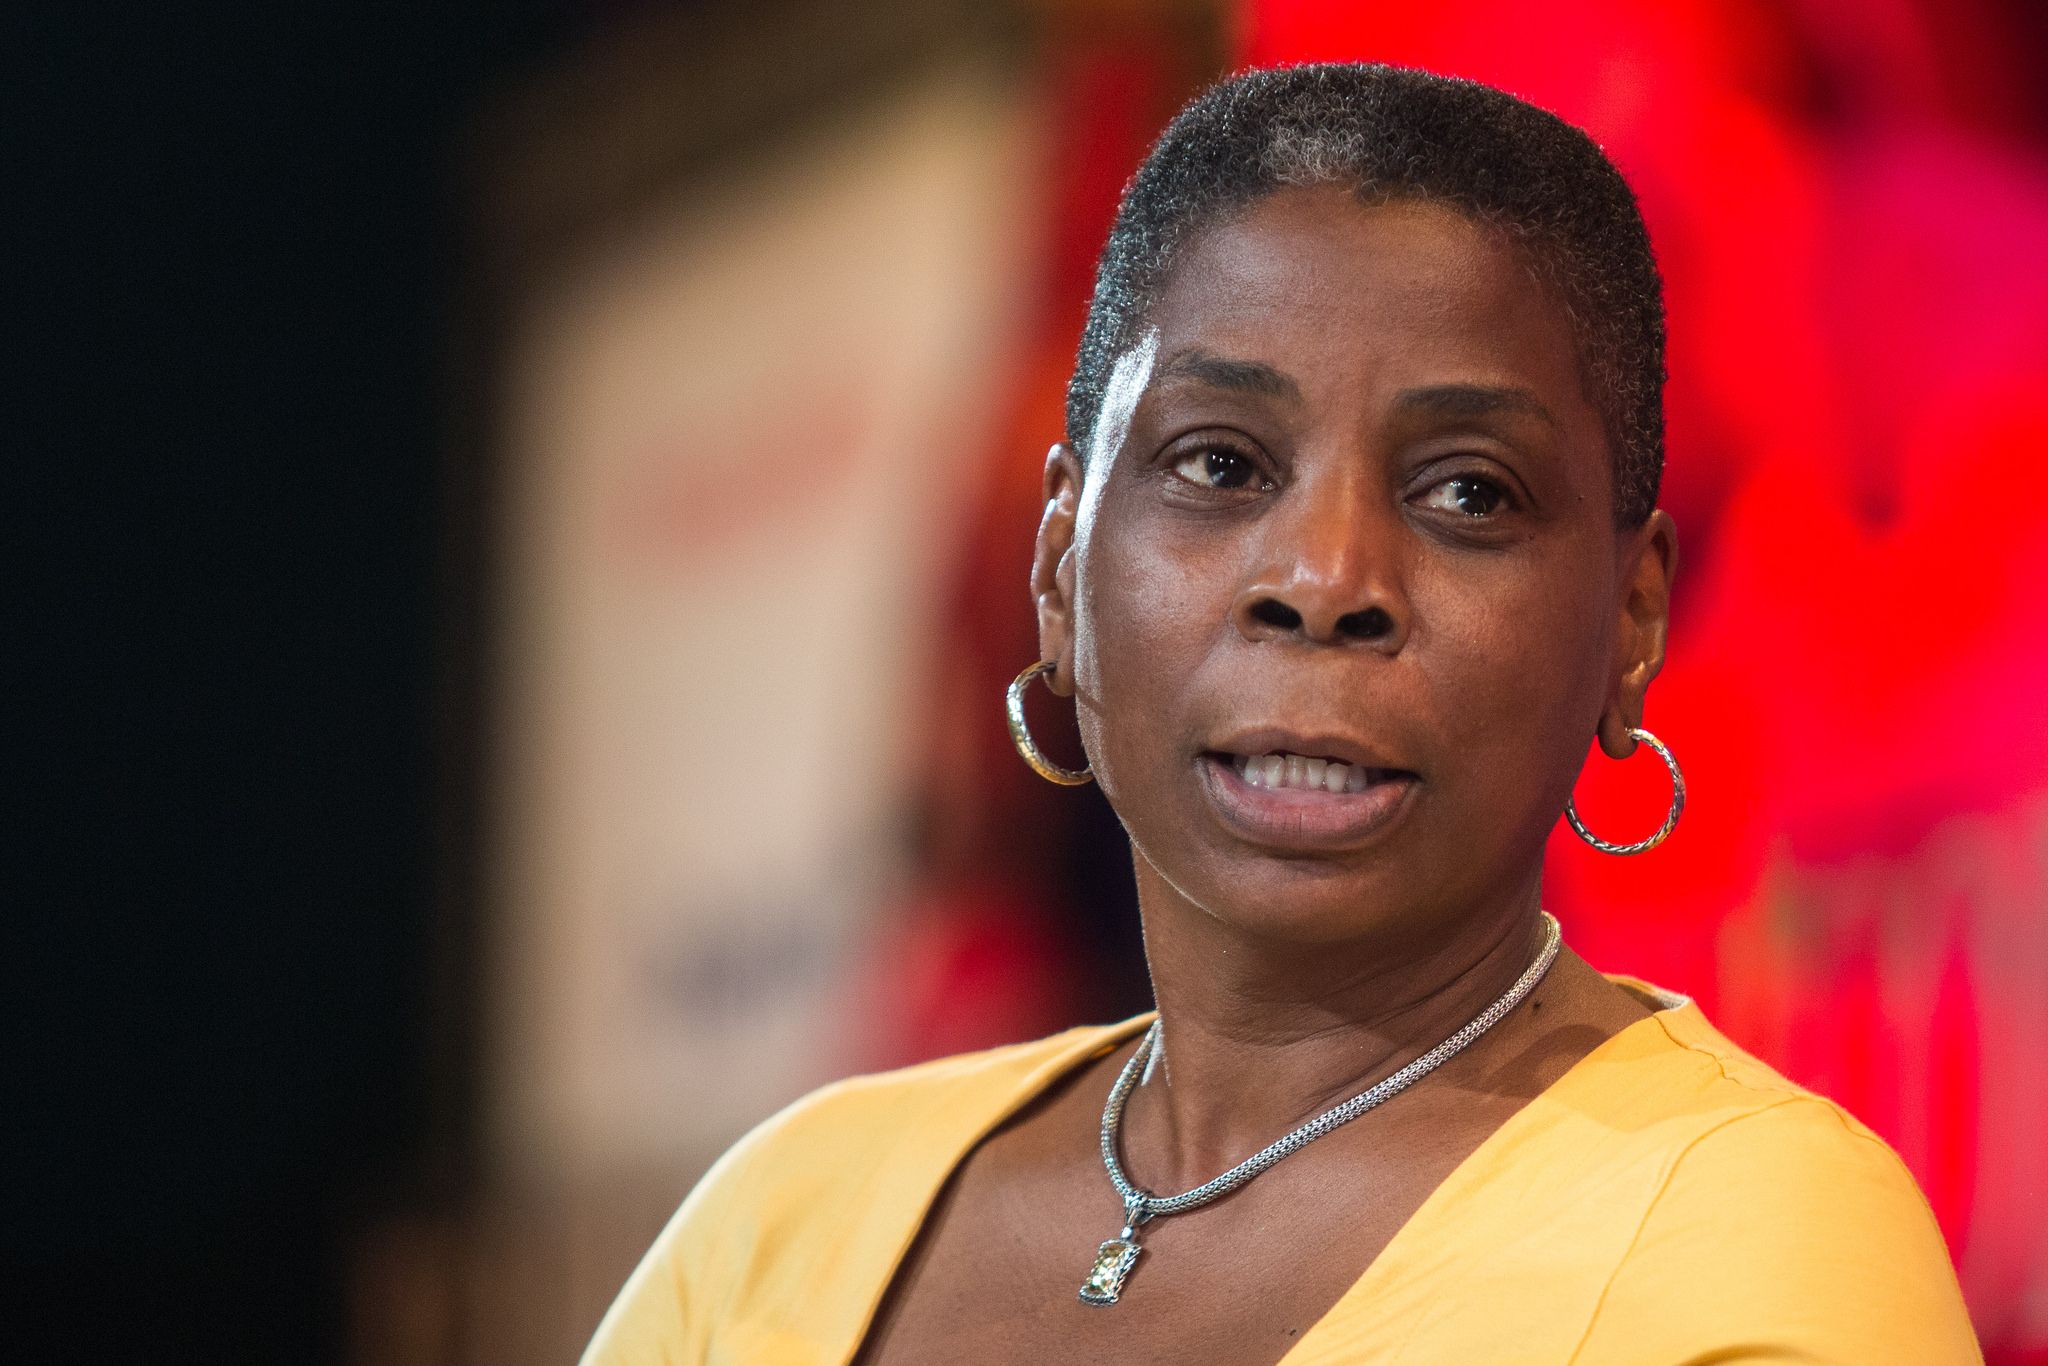 Ursula Burns - the true testament of courage, kindness and undeterred will